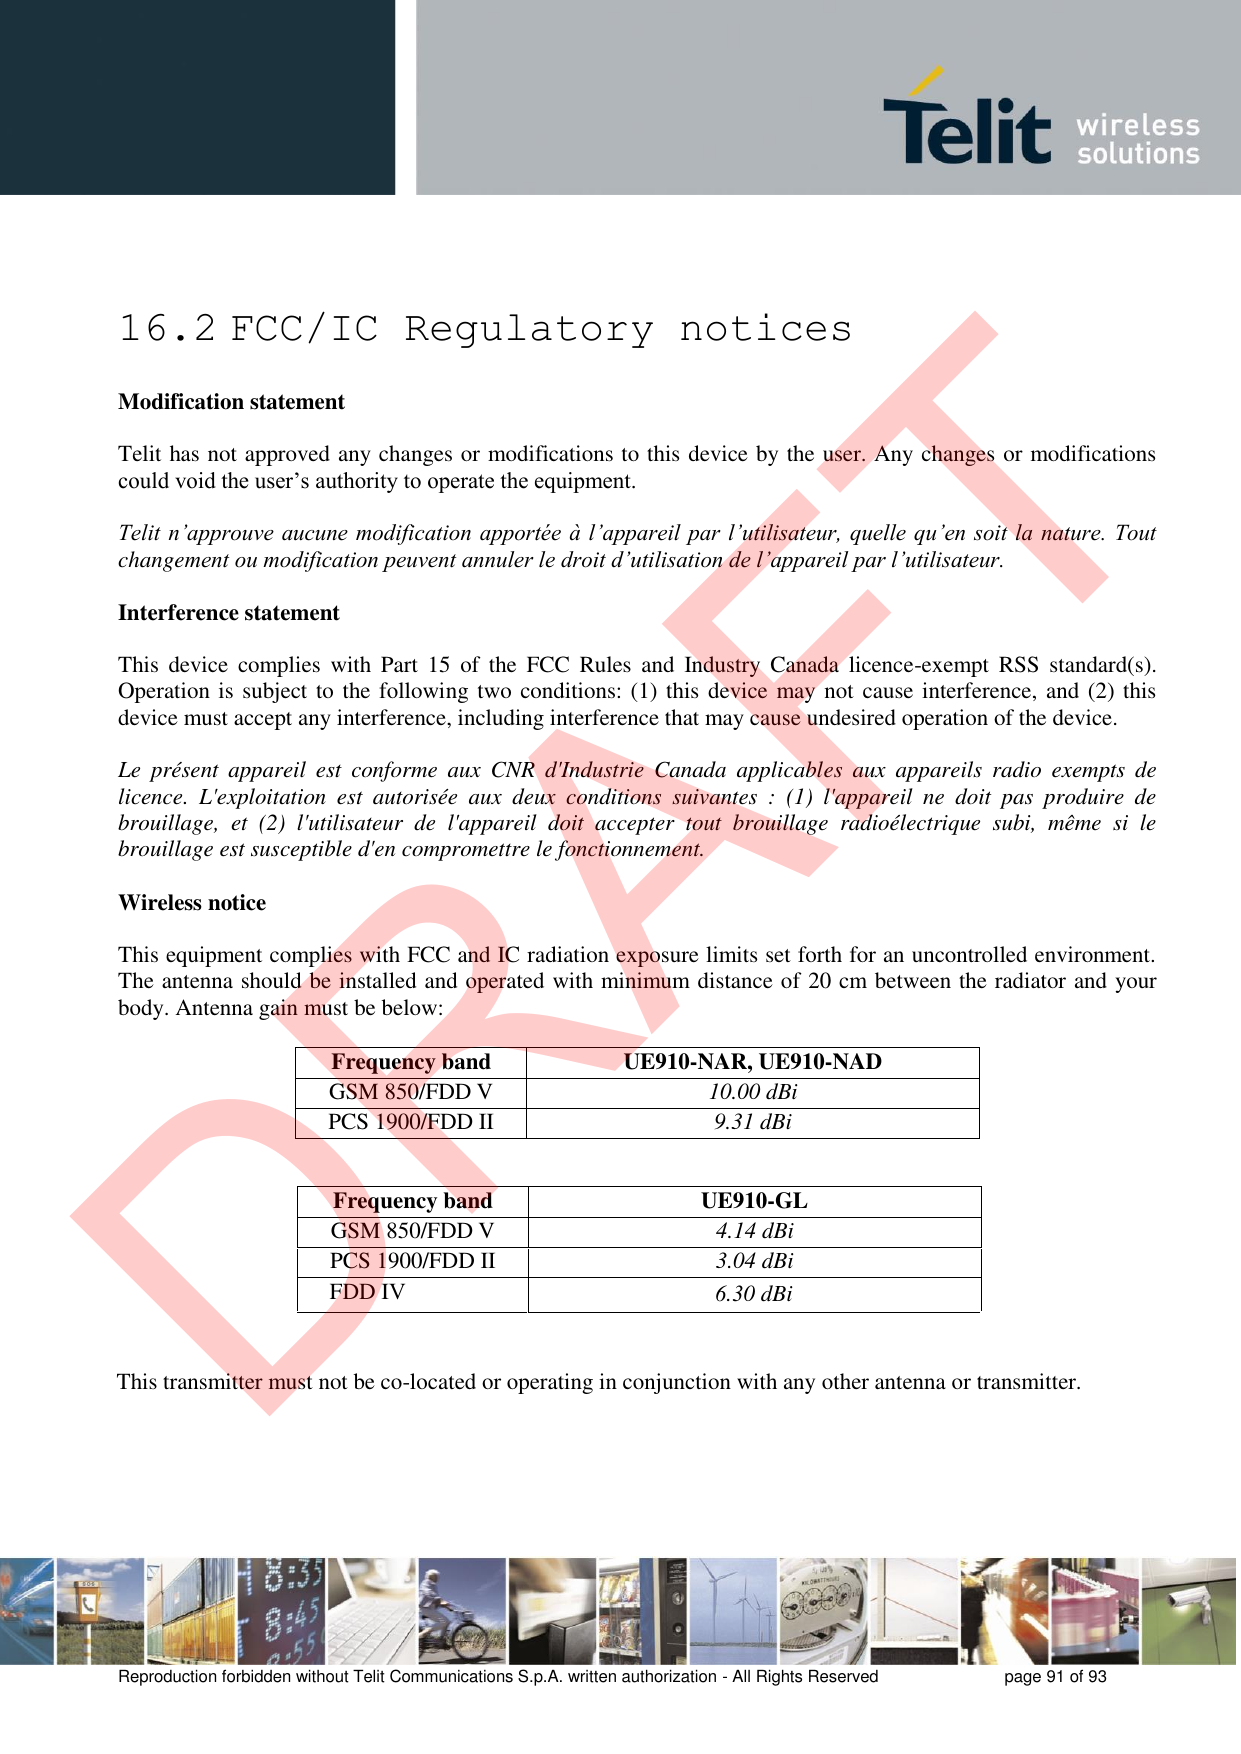 Reproduction forbidden without Telit Communications S.p.A. written authorization - All Rights Reserved  page 91 of 93 16.2 FCC/IC Regulatory notices Modification statement Telit has not approved any changes or modifications to this device by the user. Any changes or modifications could void the user’s authority to operate the equipment. Telit n’approuve aucune modification apportée à l’appareil par l’utilisateur, quelle qu’en soit la nature. Tout changement ou modification peuvent annuler le droit d’utilisation de l’appareil par l’utilisateur. Interference statement This  device  complies  with  Part  15  of  the  FCC  Rules  and  Industry  Canada  licence-exempt  RSS  standard(s). Operation is subject to the following two conditions: (1) this device may not cause interference, and (2) this device must accept any interference, including interference that may cause undesired operation of the device. Le  présent  appareil  est  conforme  aux  CNR  d&apos;Industrie  Canada  applicables  aux  appareils  radio  exempts  de licence.  L&apos;exploitation  est  autorisée  aux  deux  conditions  suivantes  :  (1)  l&apos;appareil  ne  doit  pas  produire  de brouillage,  et  (2)  l&apos;utilisateur  de  l&apos;appareil  doit  accepter  tout  brouillage  radioélectrique  subi,  même  si  le brouillage est susceptible d&apos;en compromettre le fonctionnement. Wireless notice This equipment complies with FCC and IC radiation exposure limits set forth for an uncontrolled environment. The antenna should be installed and operated with minimum distance of 20 cm between the radiator and your body. Antenna gain must be below: Frequency band UE910-NAR, UE910-NAD GSM 850/FDD V  10.00 dBi PCS 1900/FDD II 9.31 dBi This transmitter must not be co-located or operating in conjunction with any other antenna or transmitter. Frequency band  UE910-GL GSM 850/FDD V  4.14 dBi PCS 1900/FDD II  3.04 dBi FDD IV6.30 dBi DRAFT